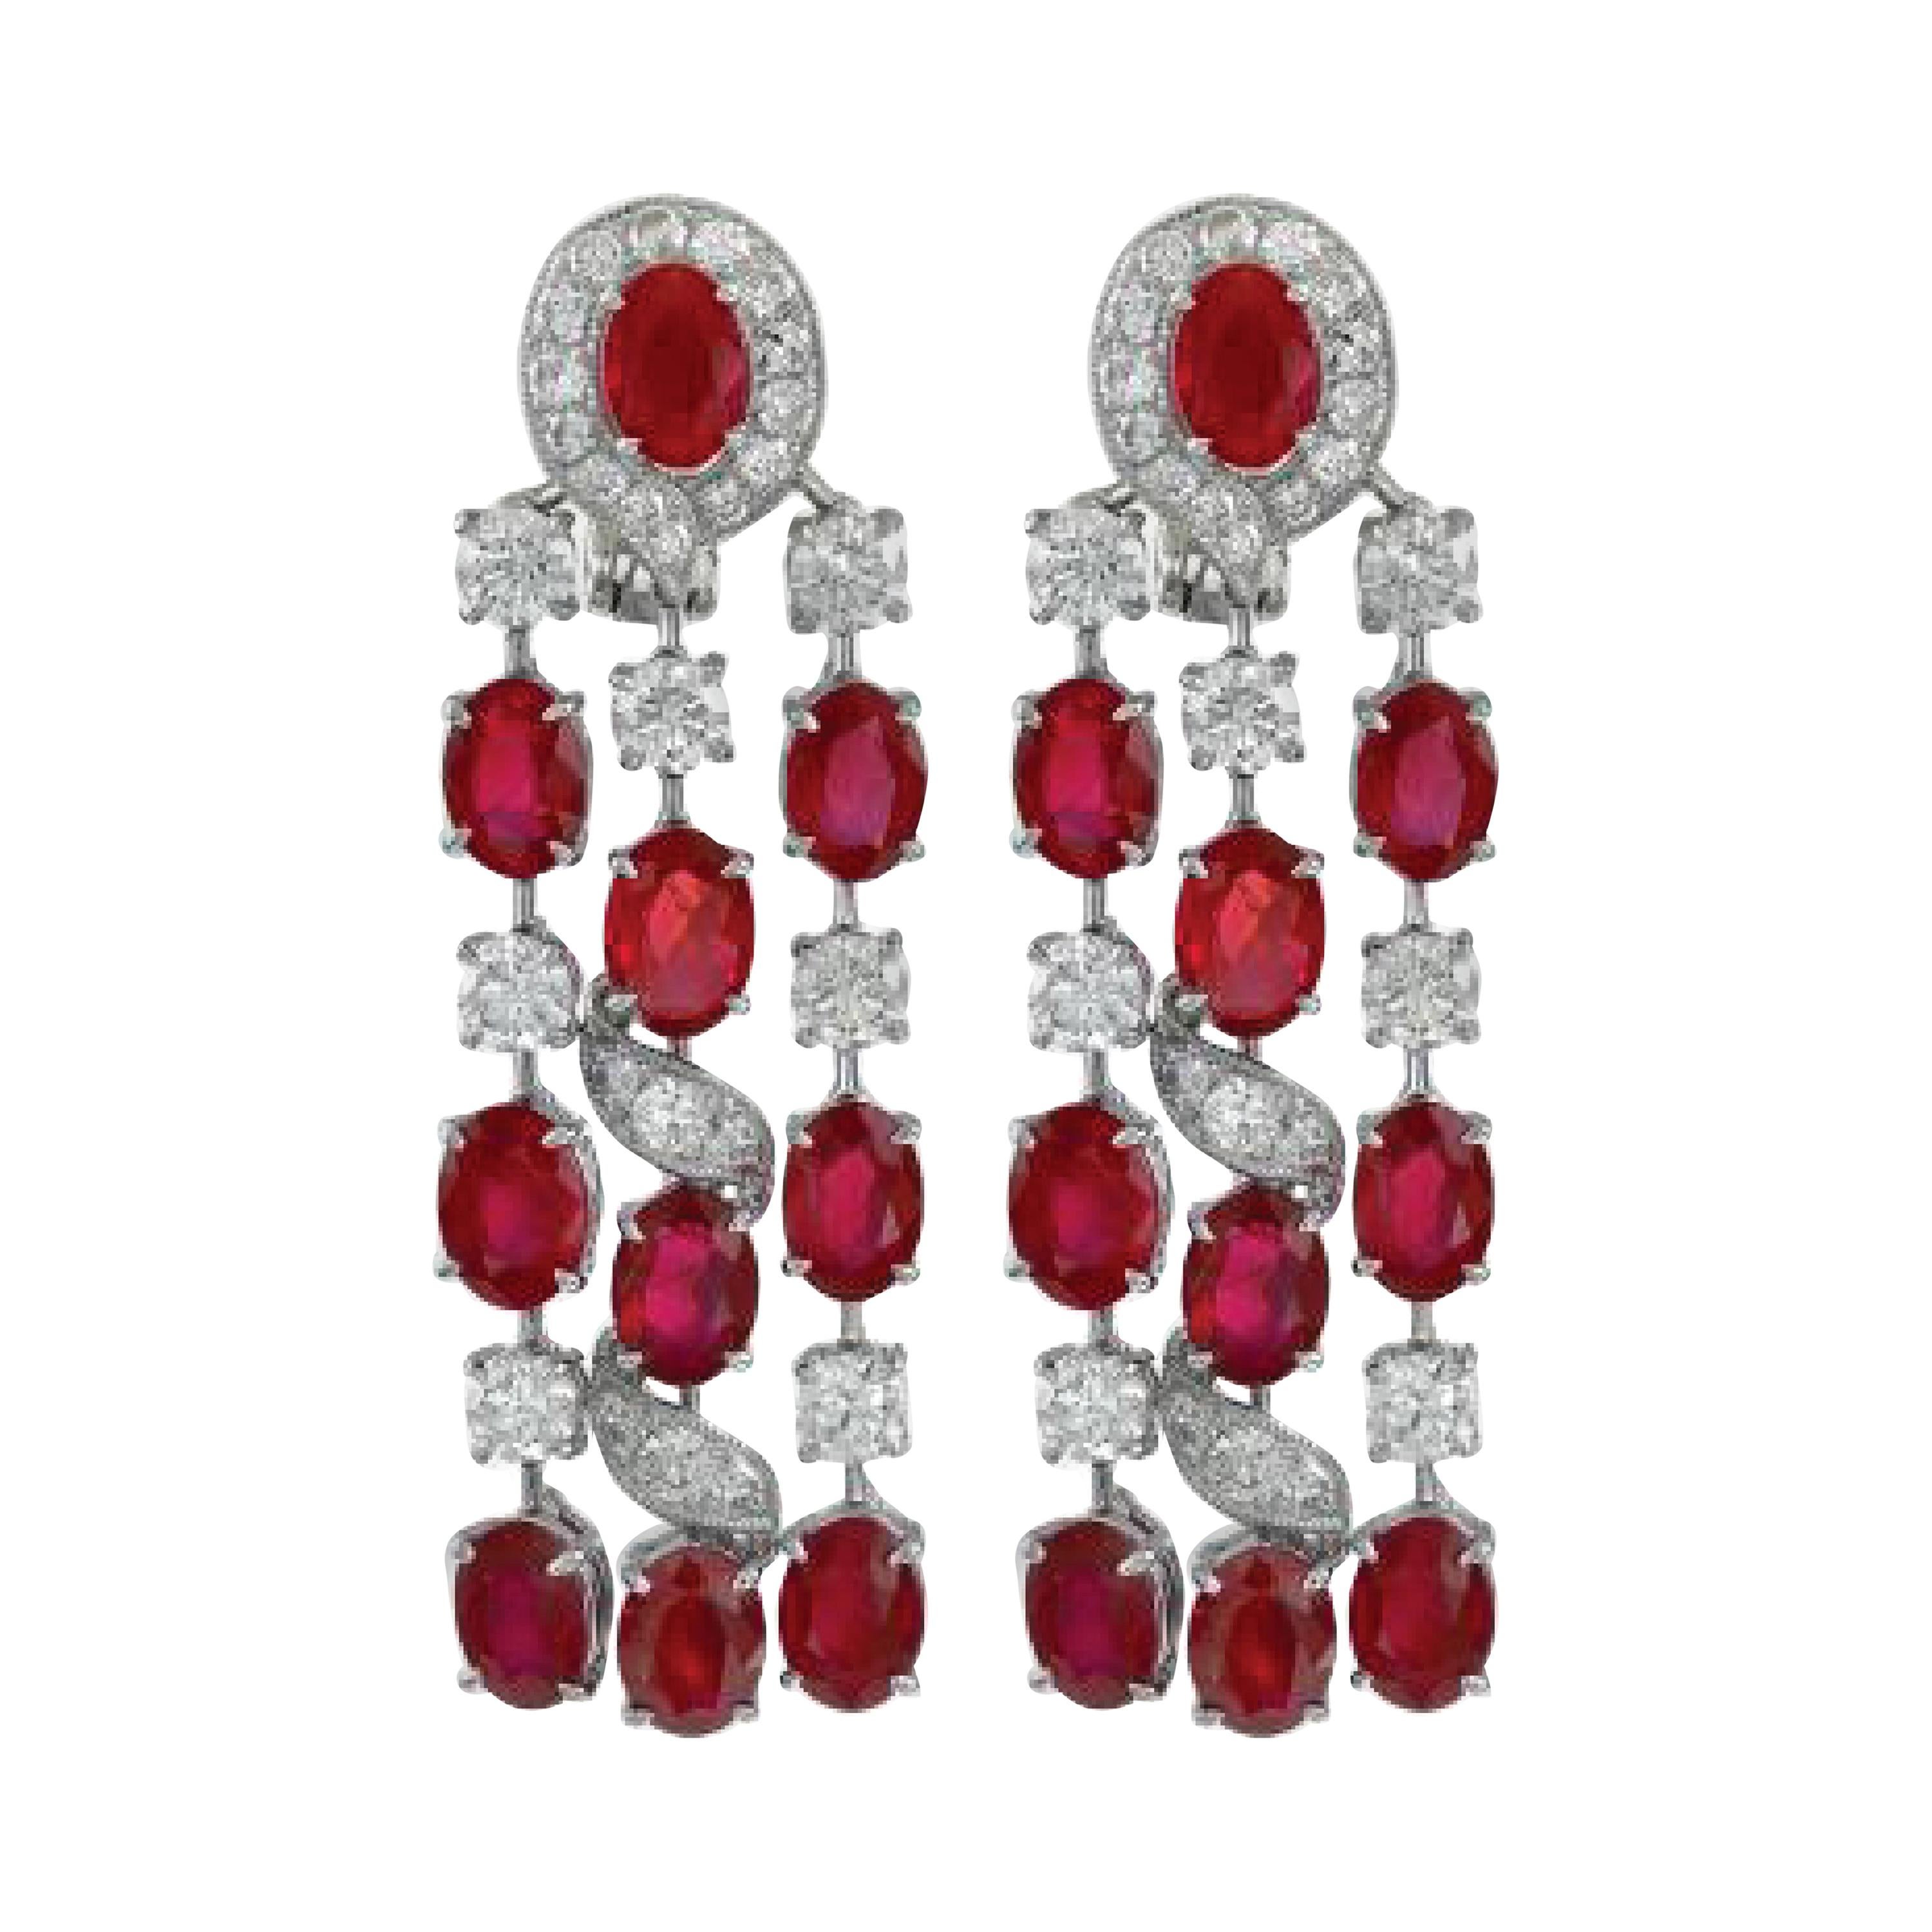 Gorgeous Platinum 17.83 Carat of Rubies and Diamond Hanging Earrings